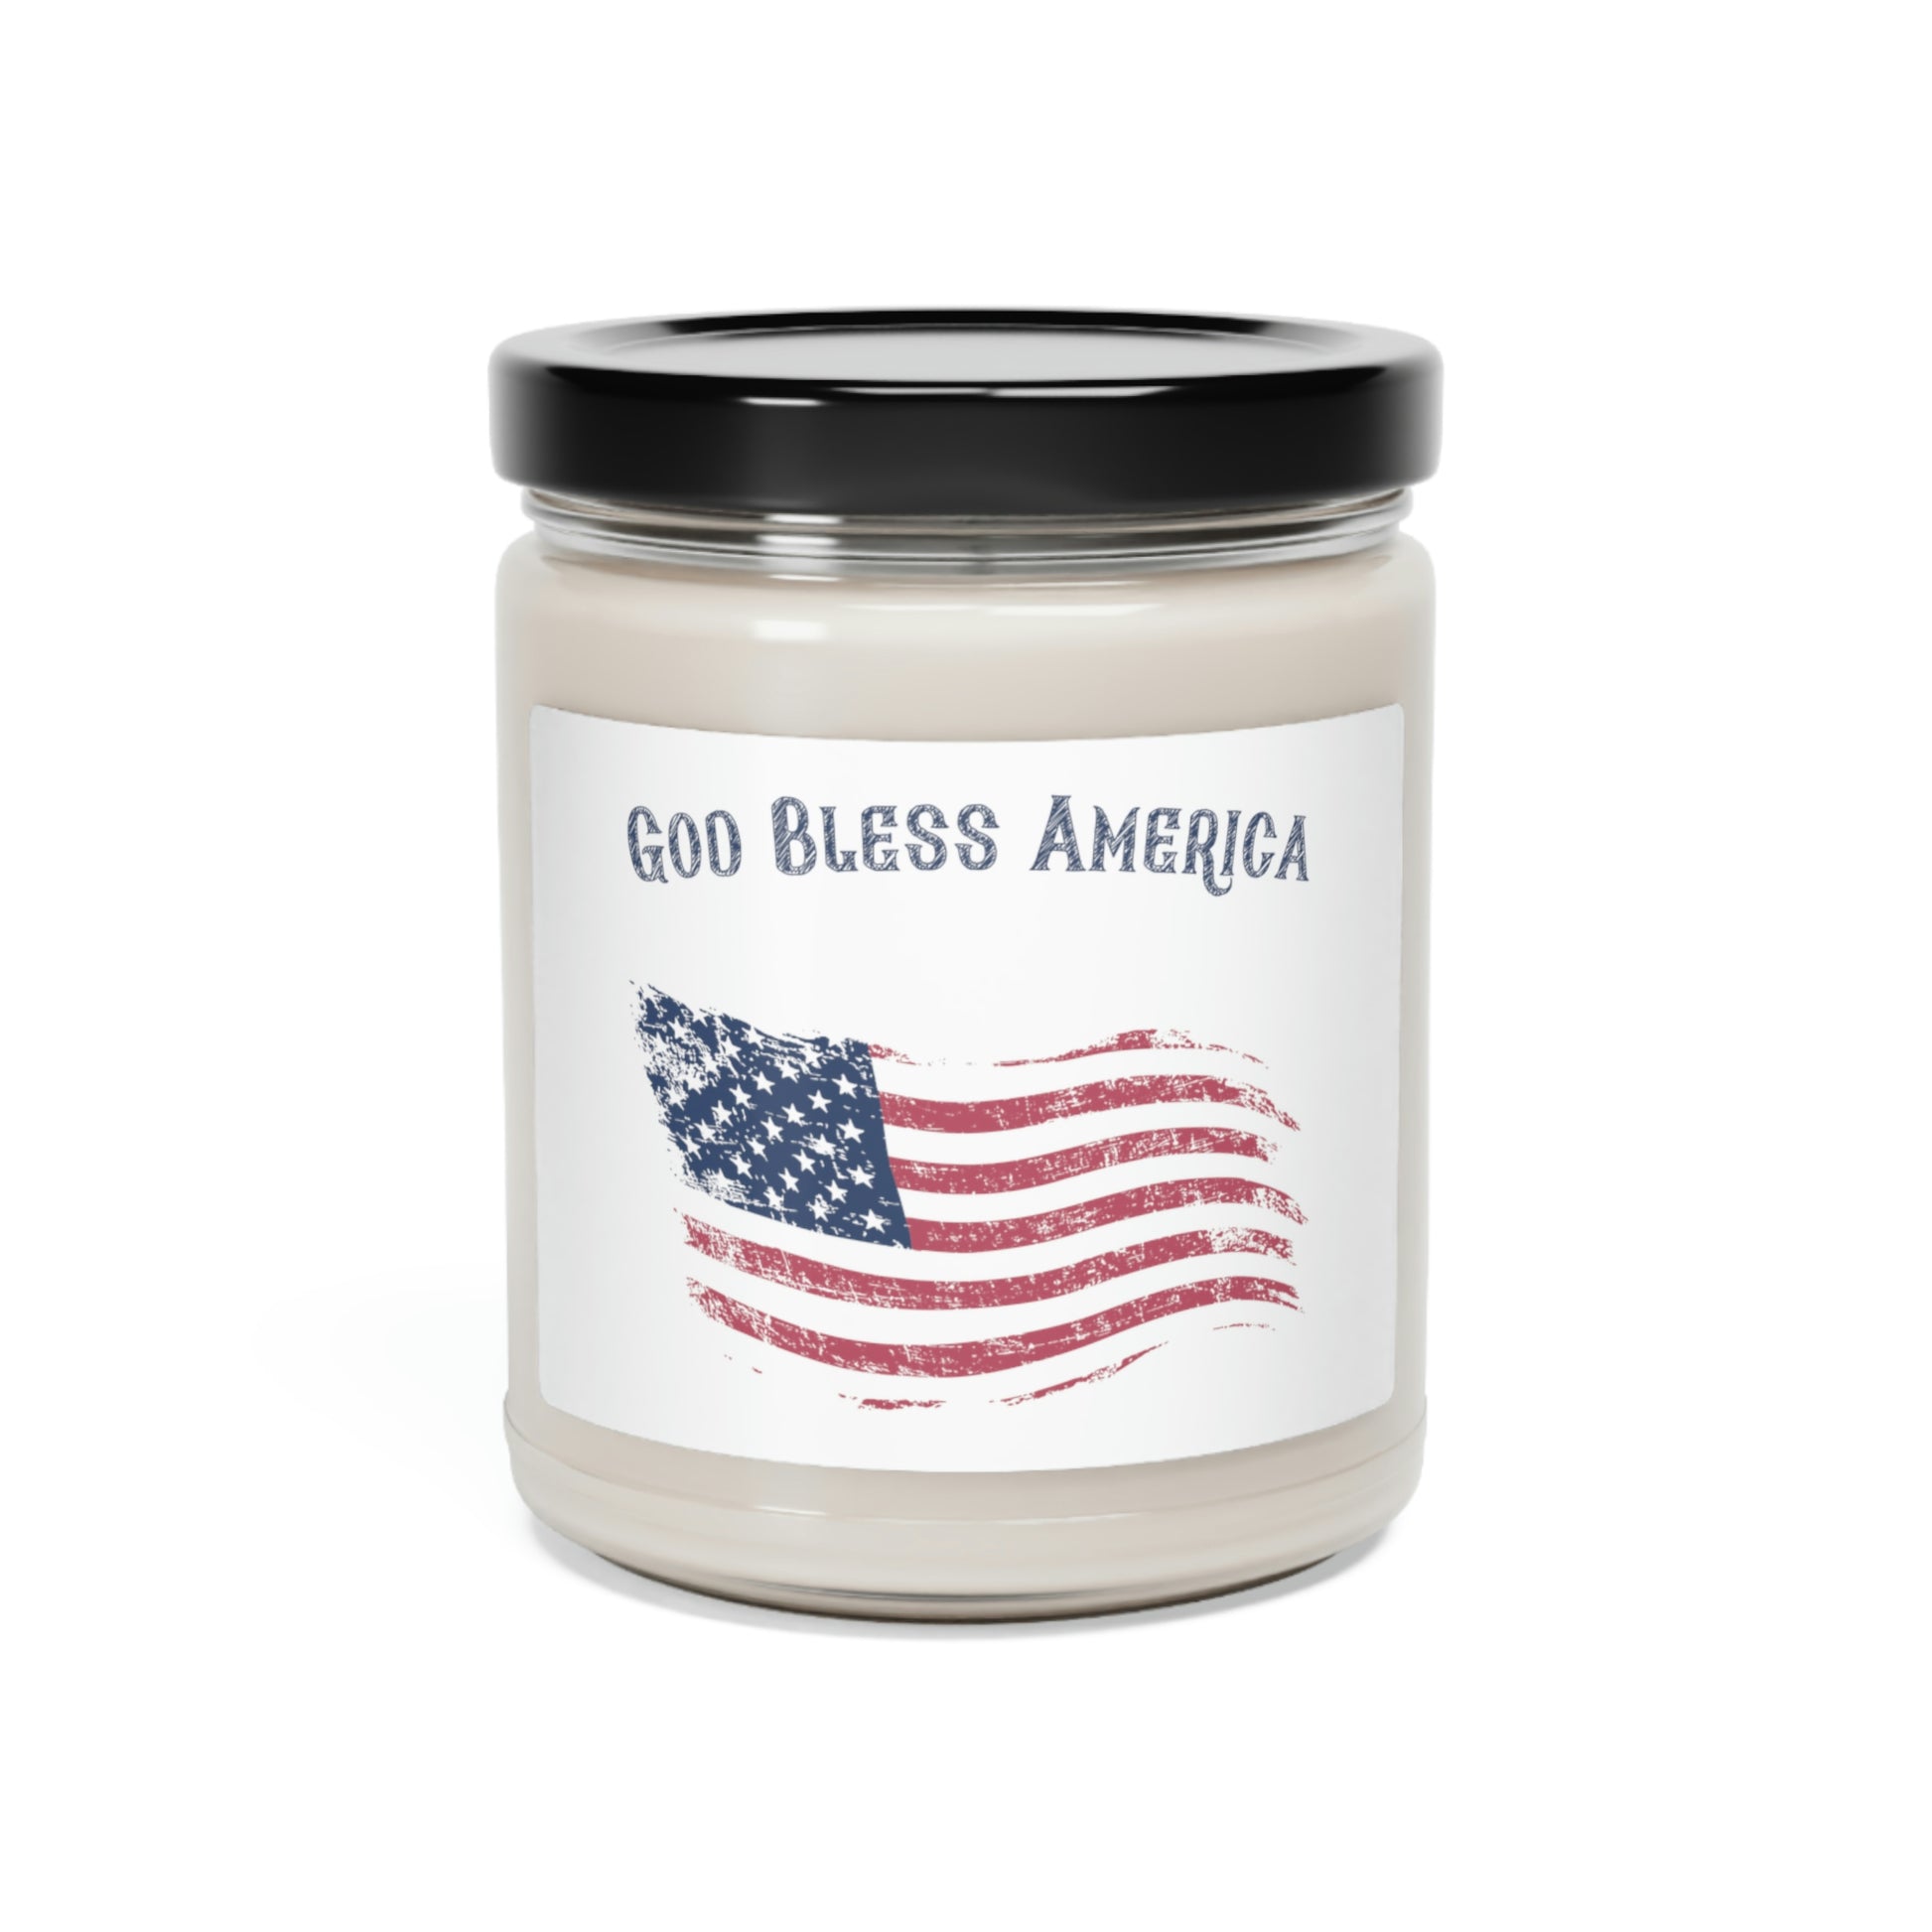 Patriotic American flag candle for home decor